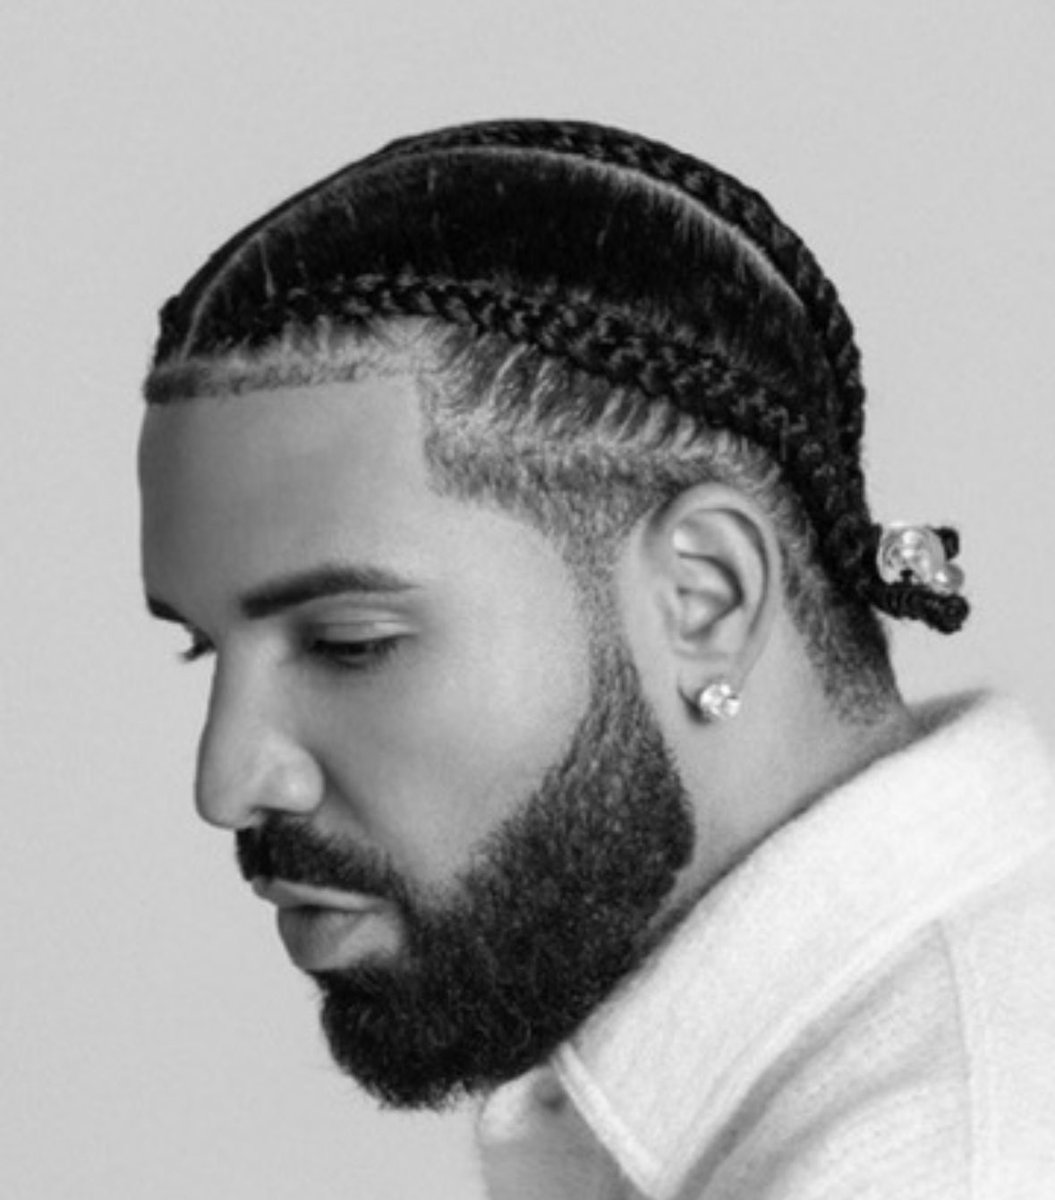 Drake joins The Beatles as the only acts in history to chart on the Billboard 200 for at least 3,000 cumulative weeks